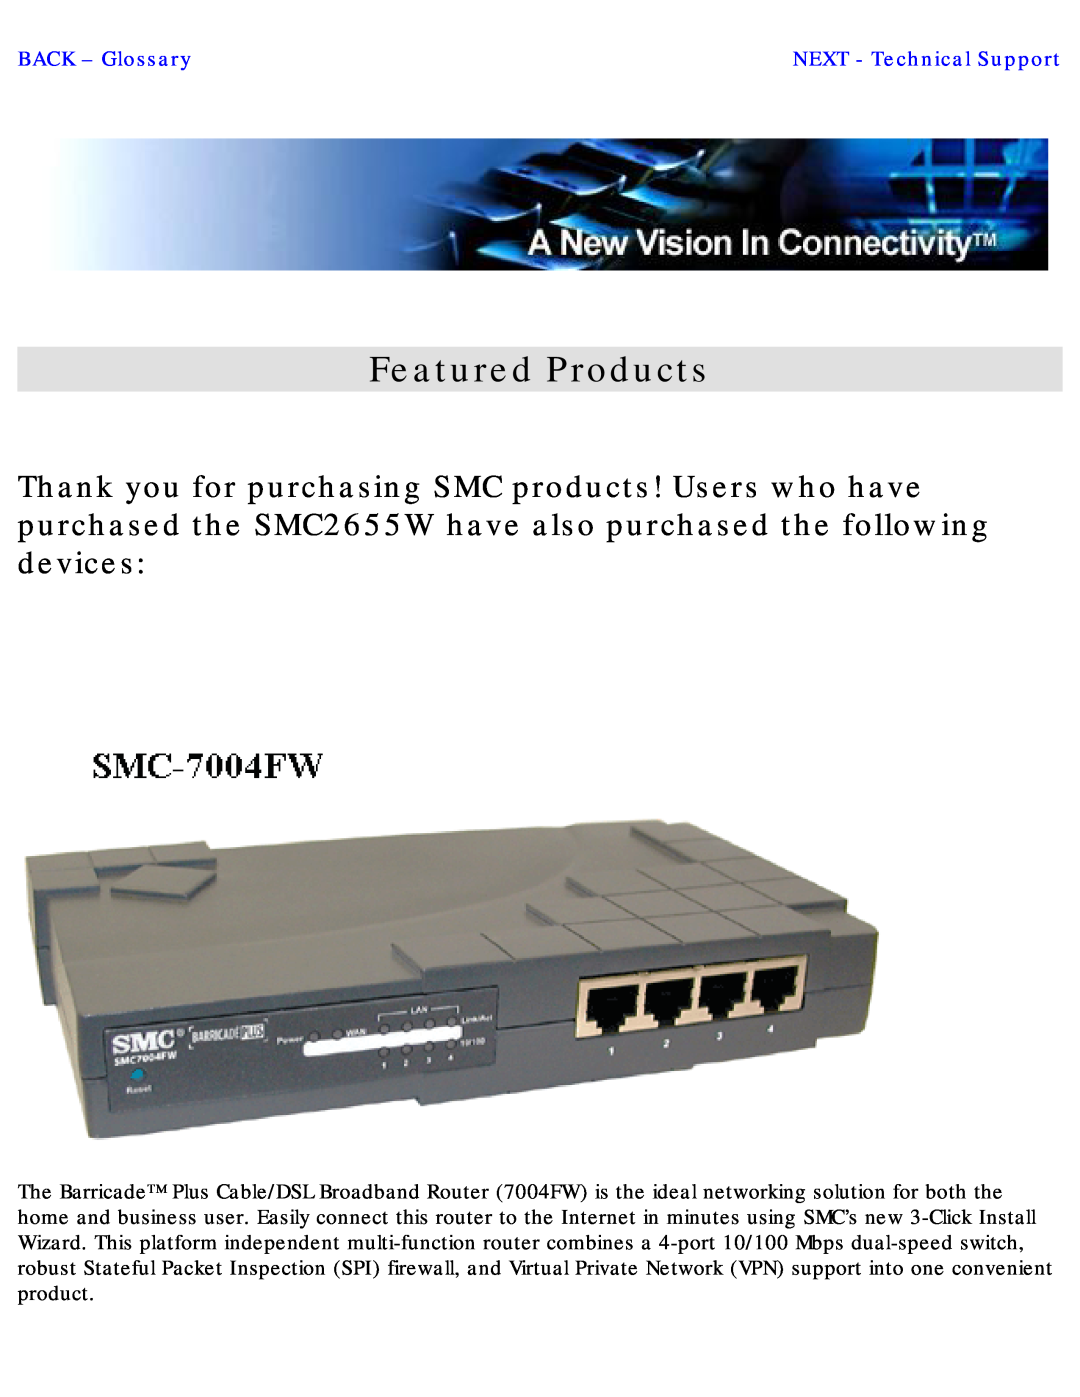 SMC Networks SMC2655W warranty Featured Products, BACK - Glossary 